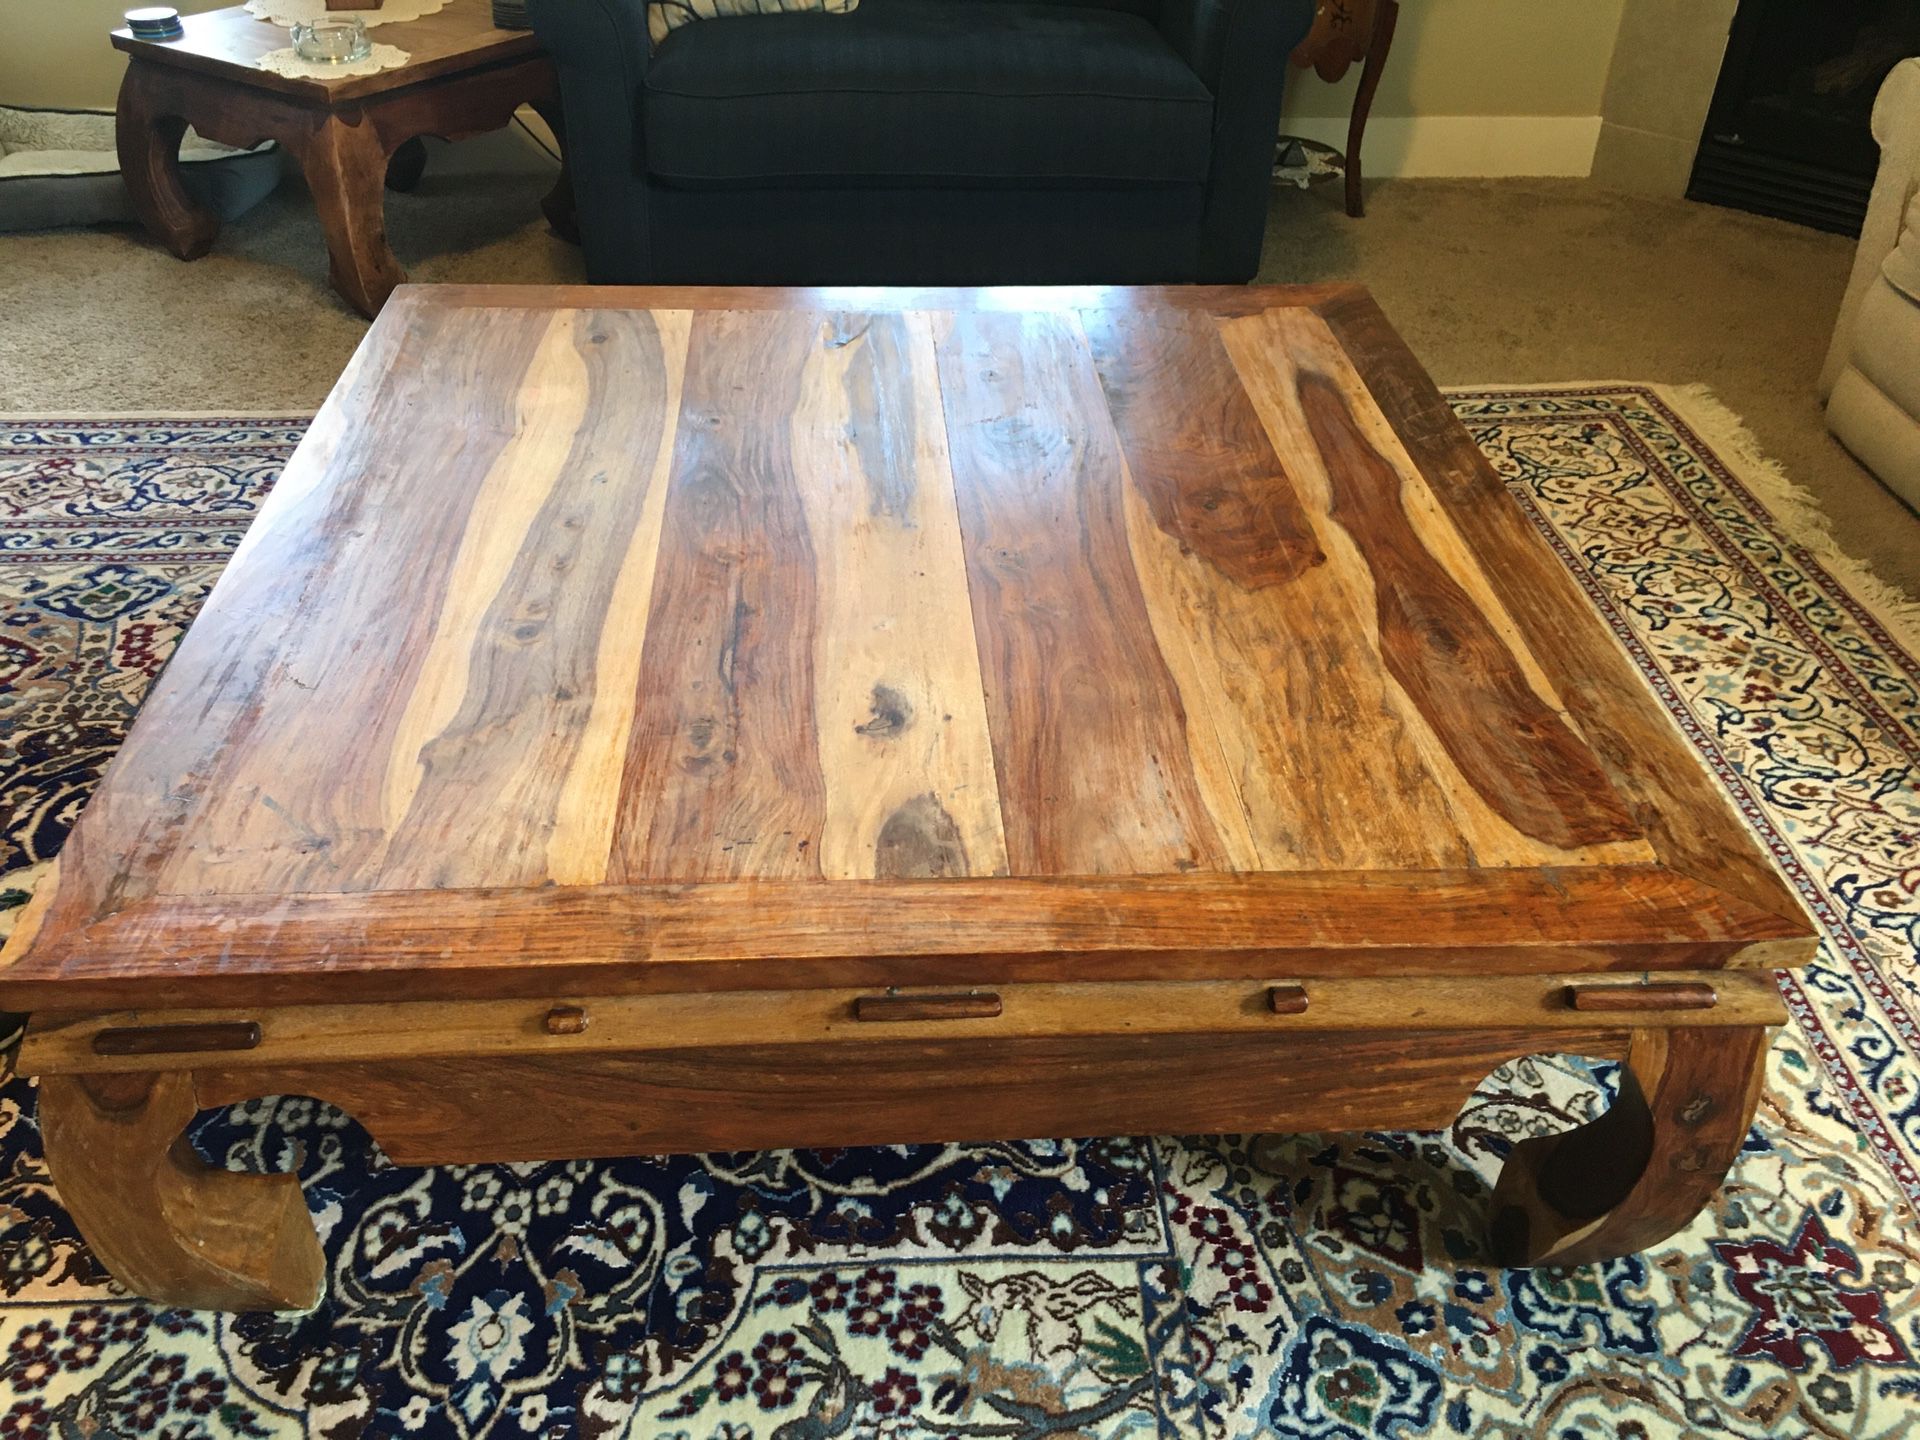 Antique Indian solid wood center table